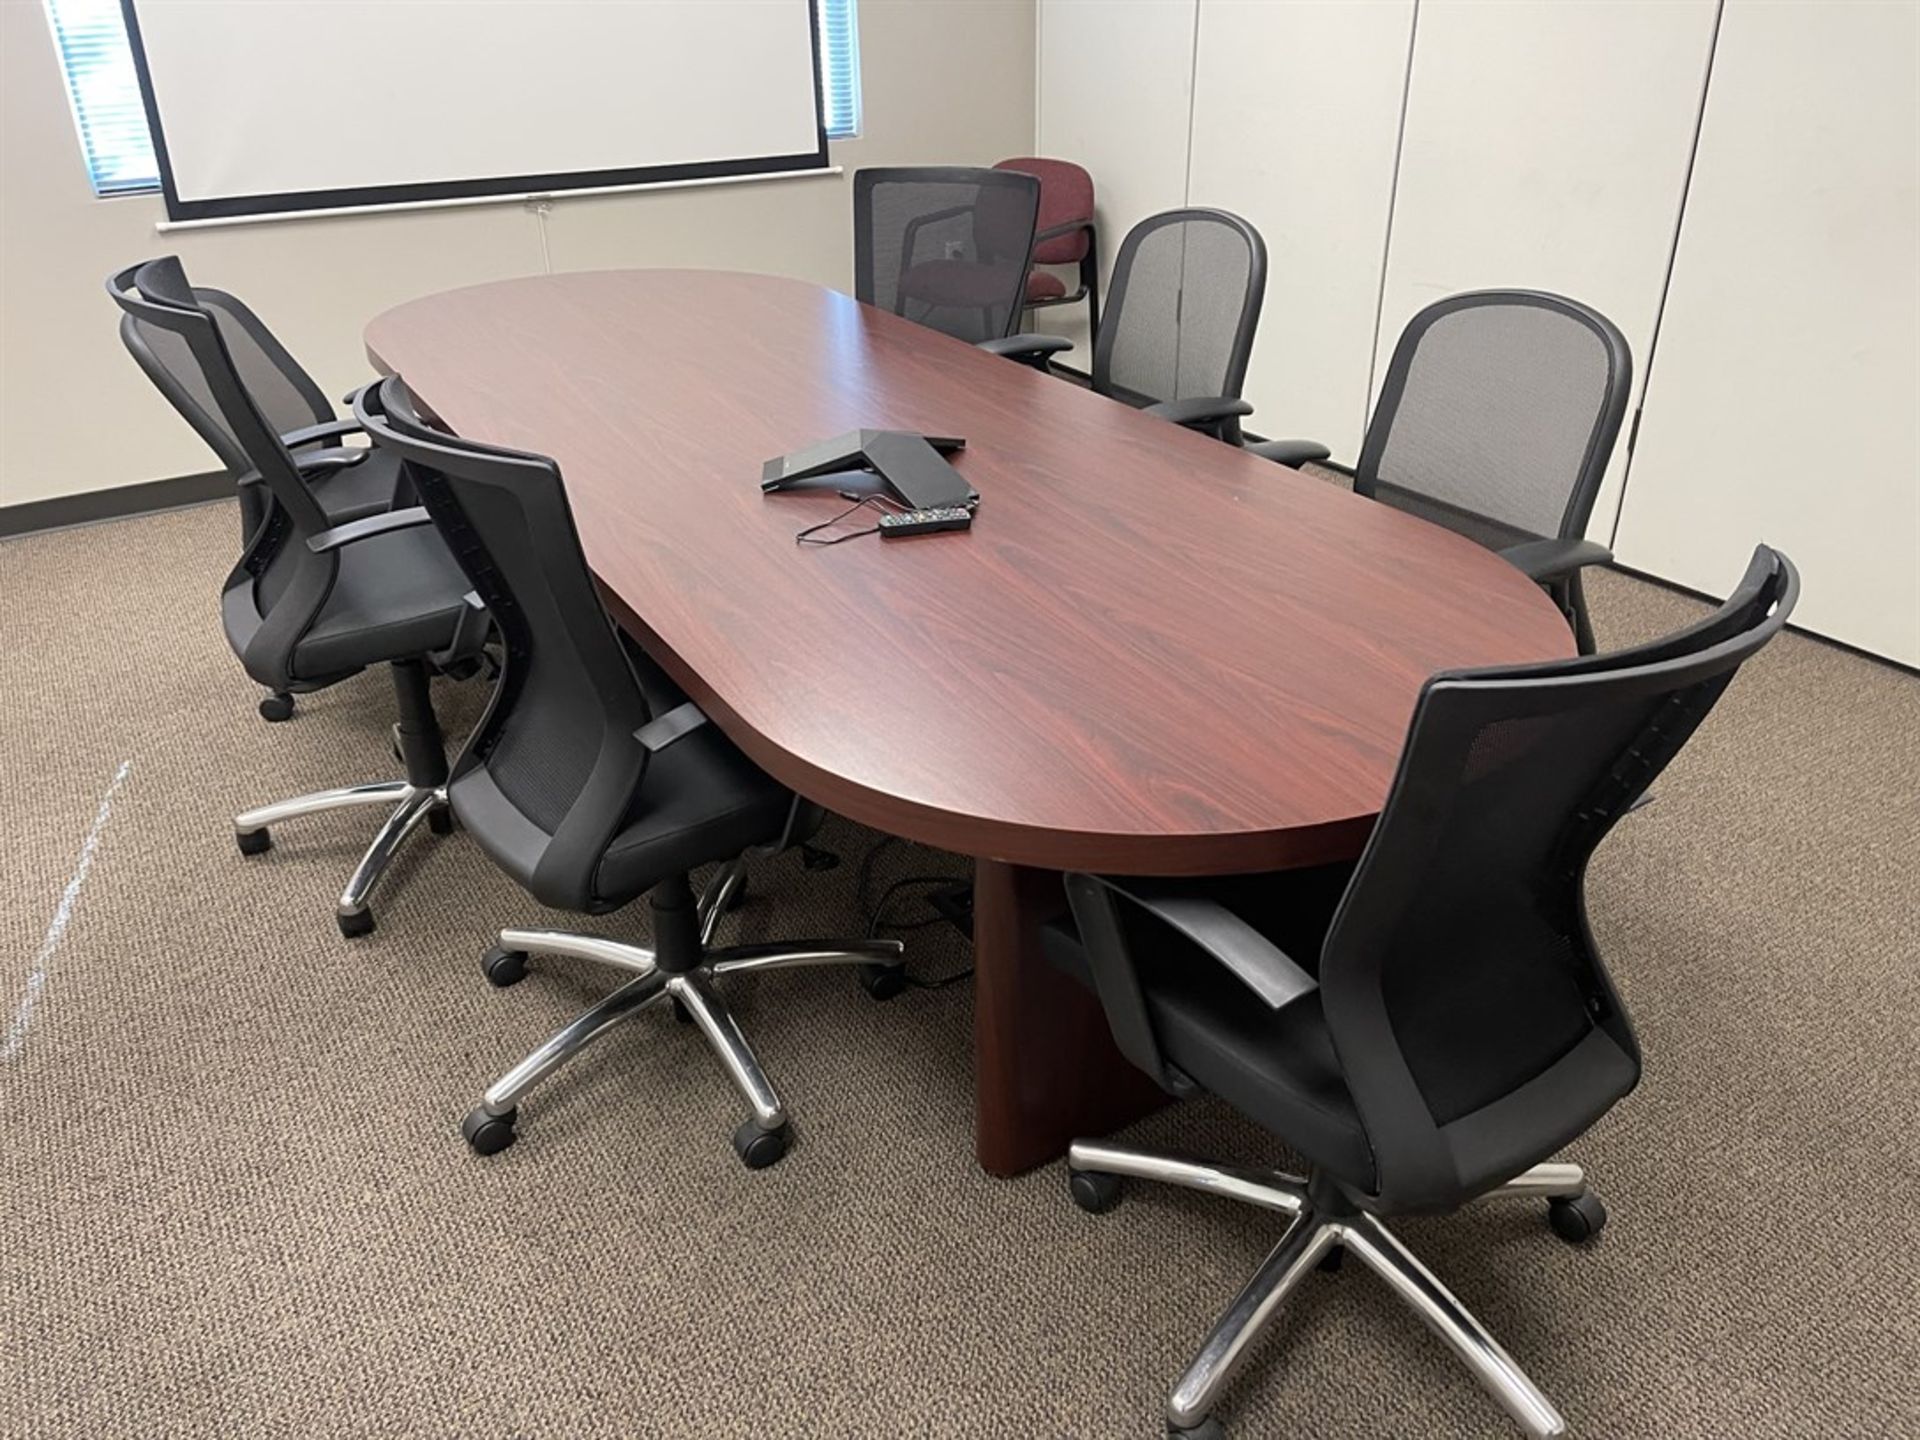 Conference Table w/ Chairs and Credenza